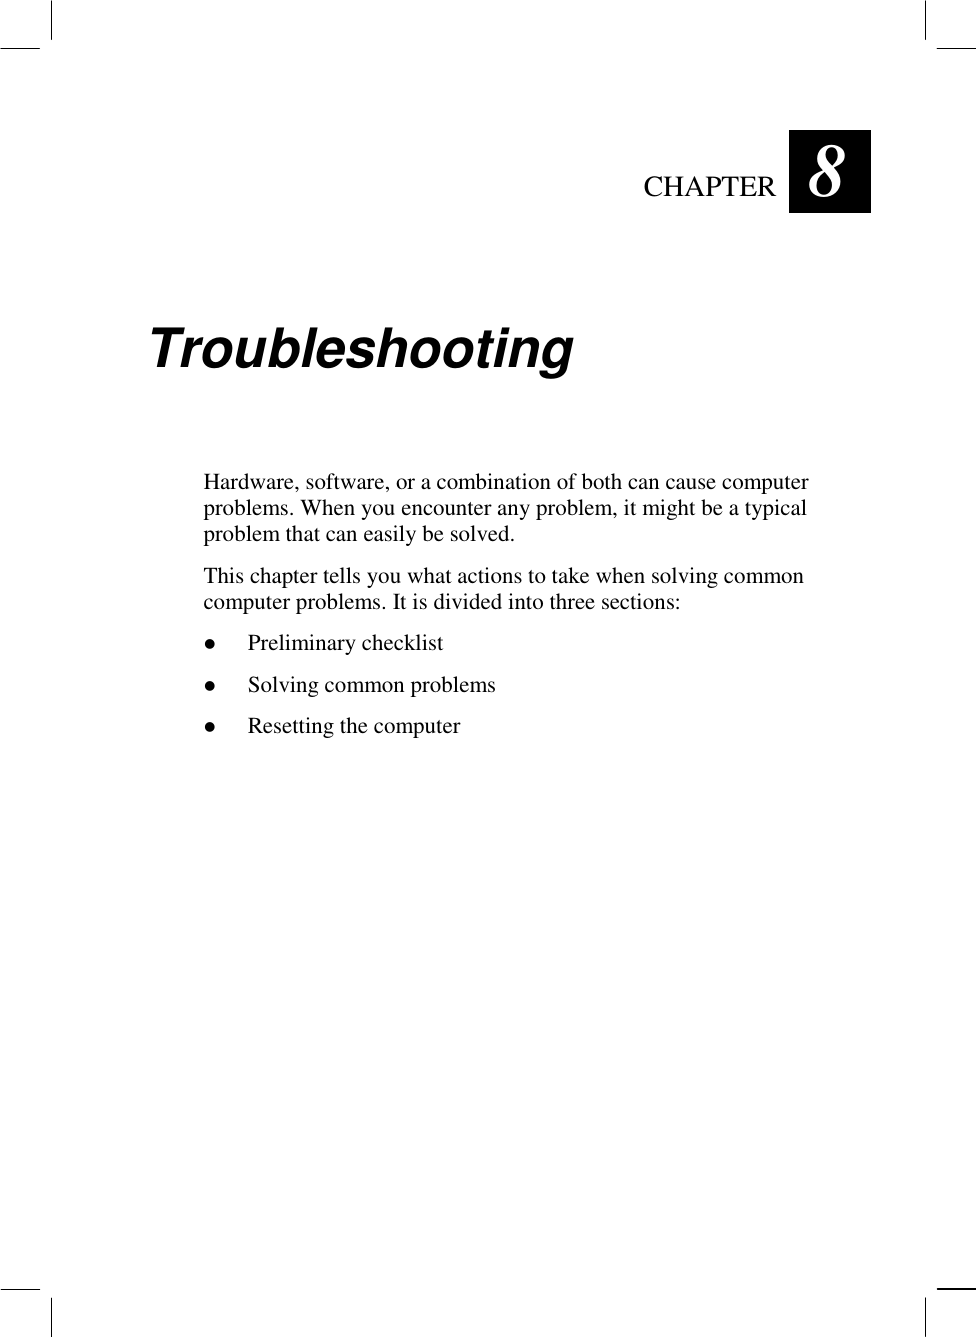   CHAPTER  8 Troubleshooting Hardware, software, or a combination of both can cause computer problems. When you encounter any problem, it might be a typical problem that can easily be solved. This chapter tells you what actions to take when solving common computer problems. It is divided into three sections: !  Preliminary checklist !  Solving common problems !  Resetting the computer 